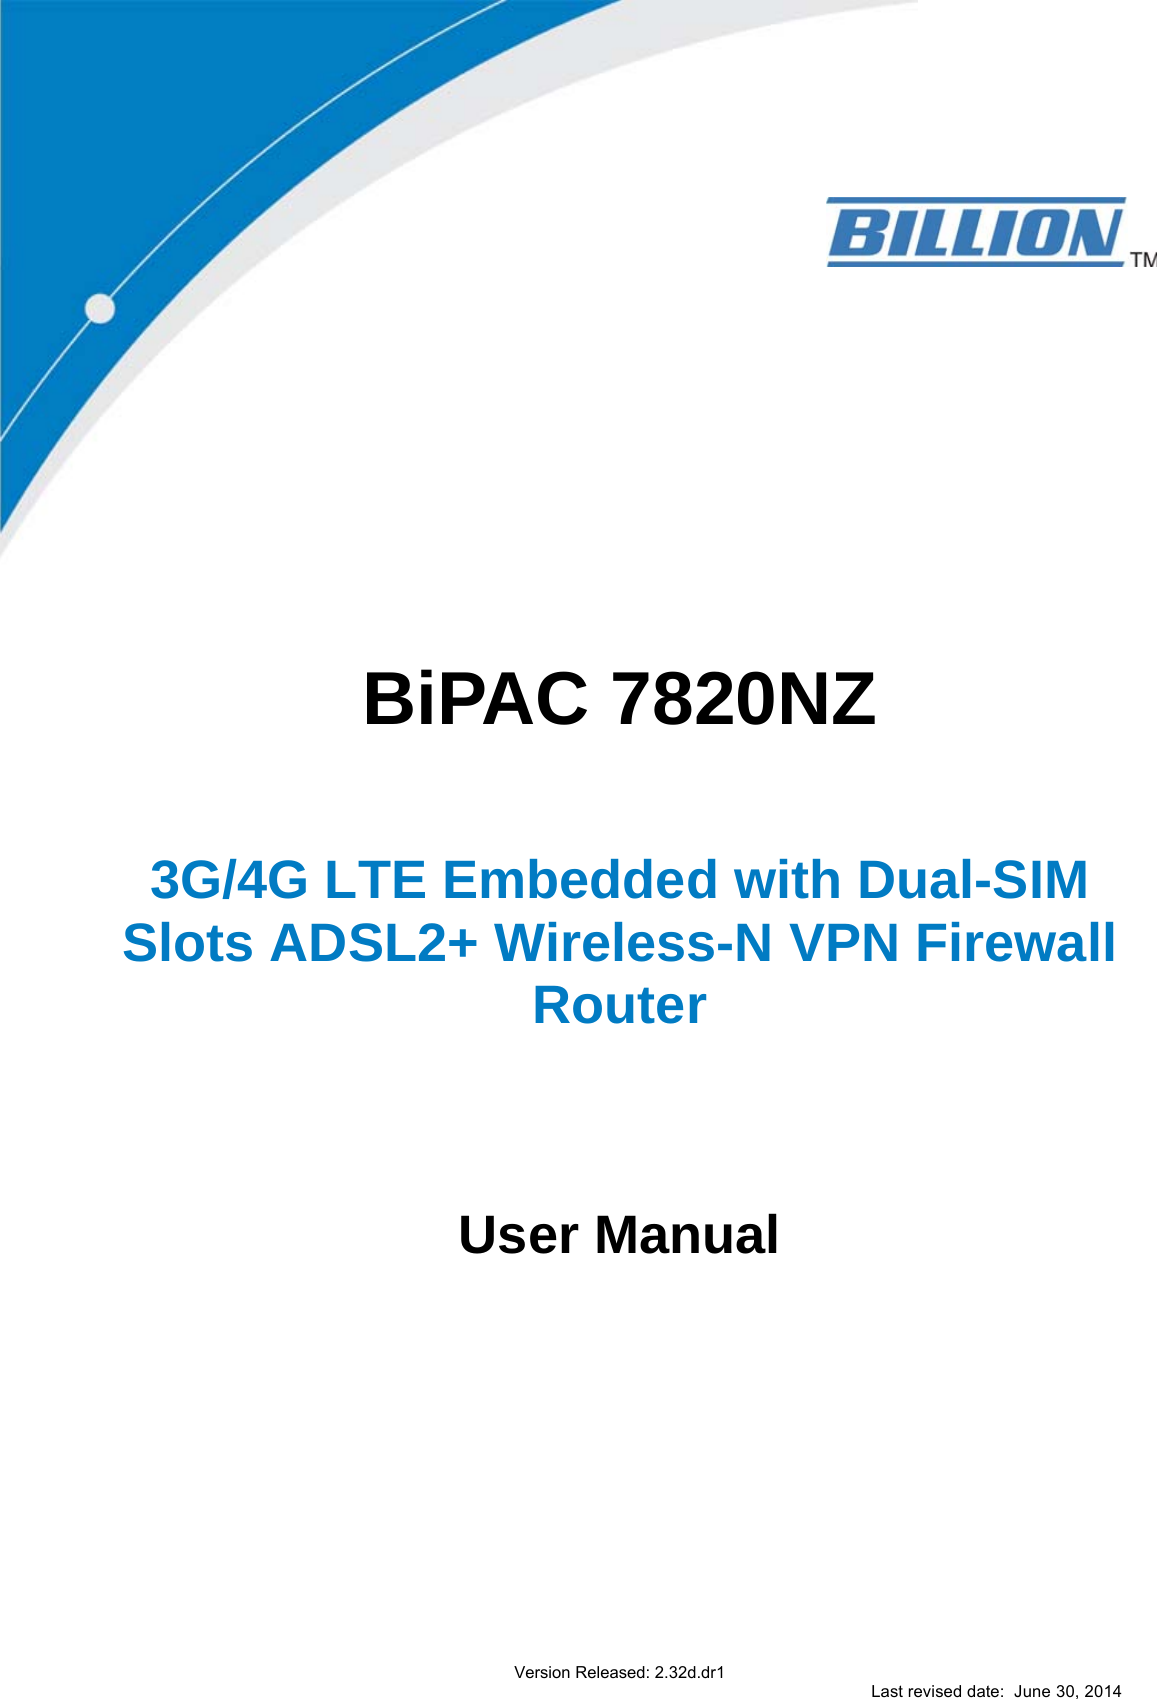                  BiPAC 7820NZ      3G/4G LTE Embedded with Dual-SIM Slots ADSL2+ Wireless-N VPN Firewall Router        User Manual                    Version Released: 2.32d.dr1 Last revised date:  June 30, 2014 